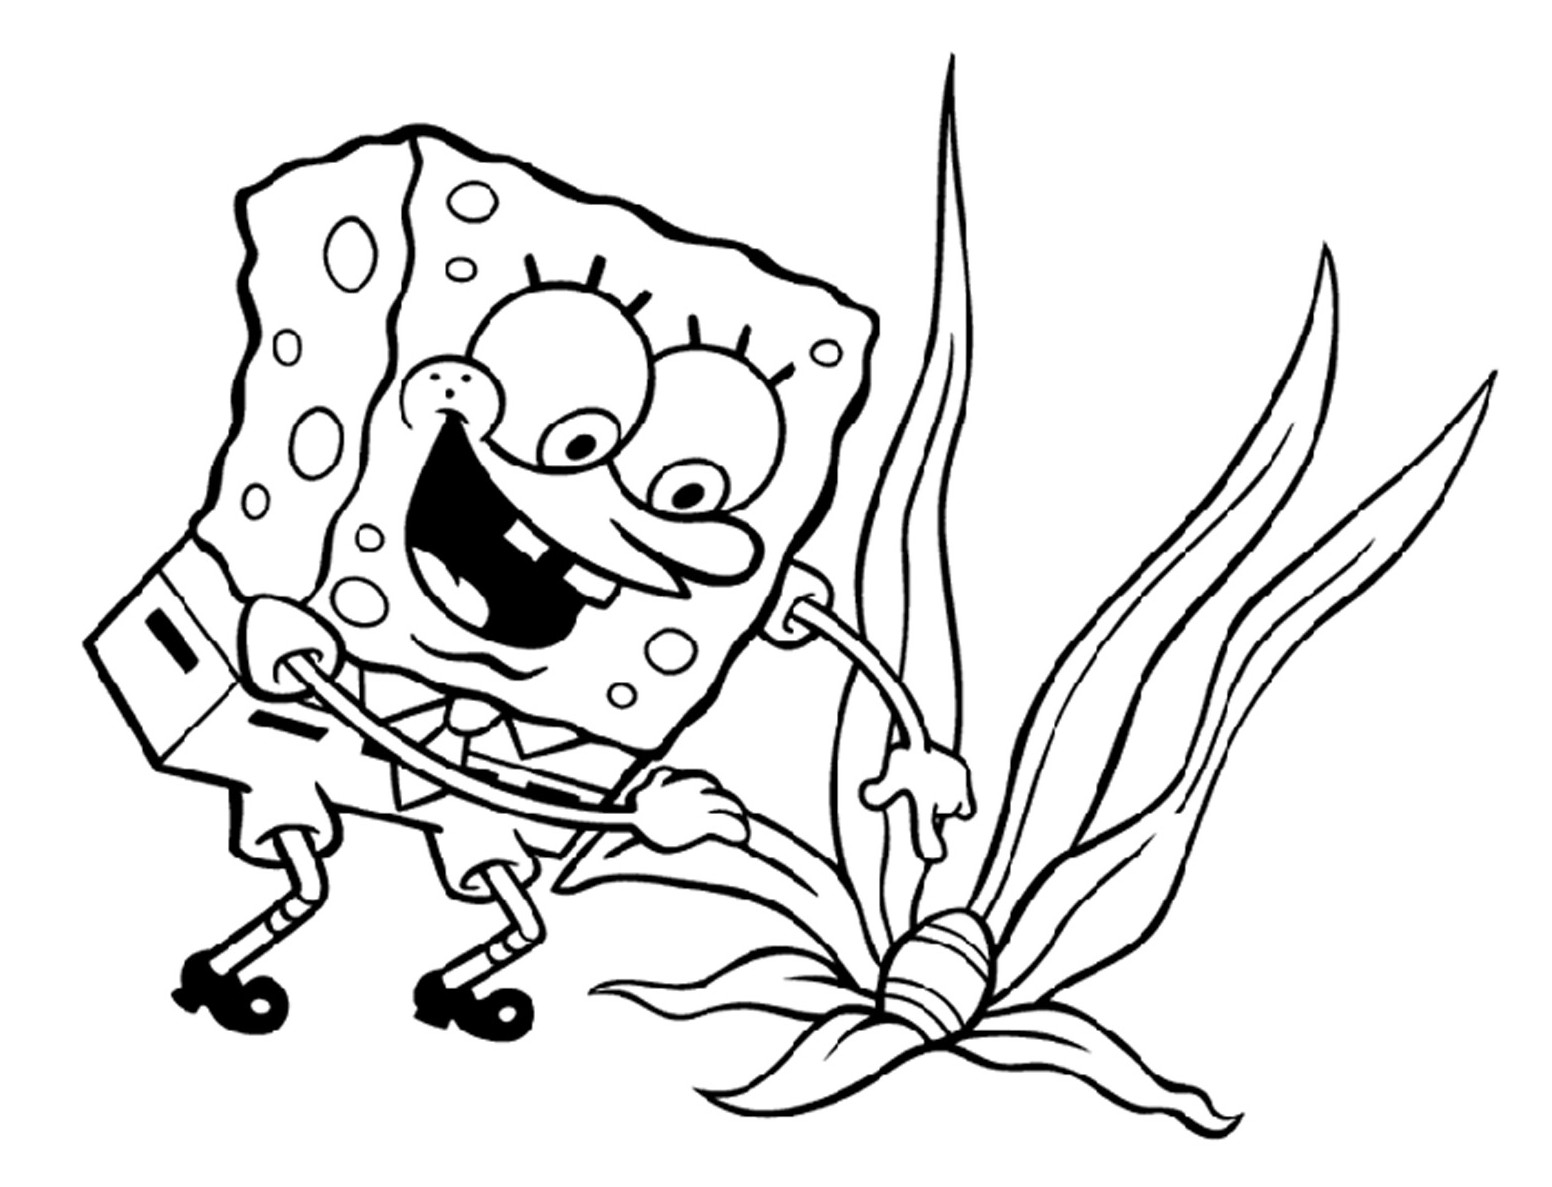 spongebob coloring pages to print - photo #1